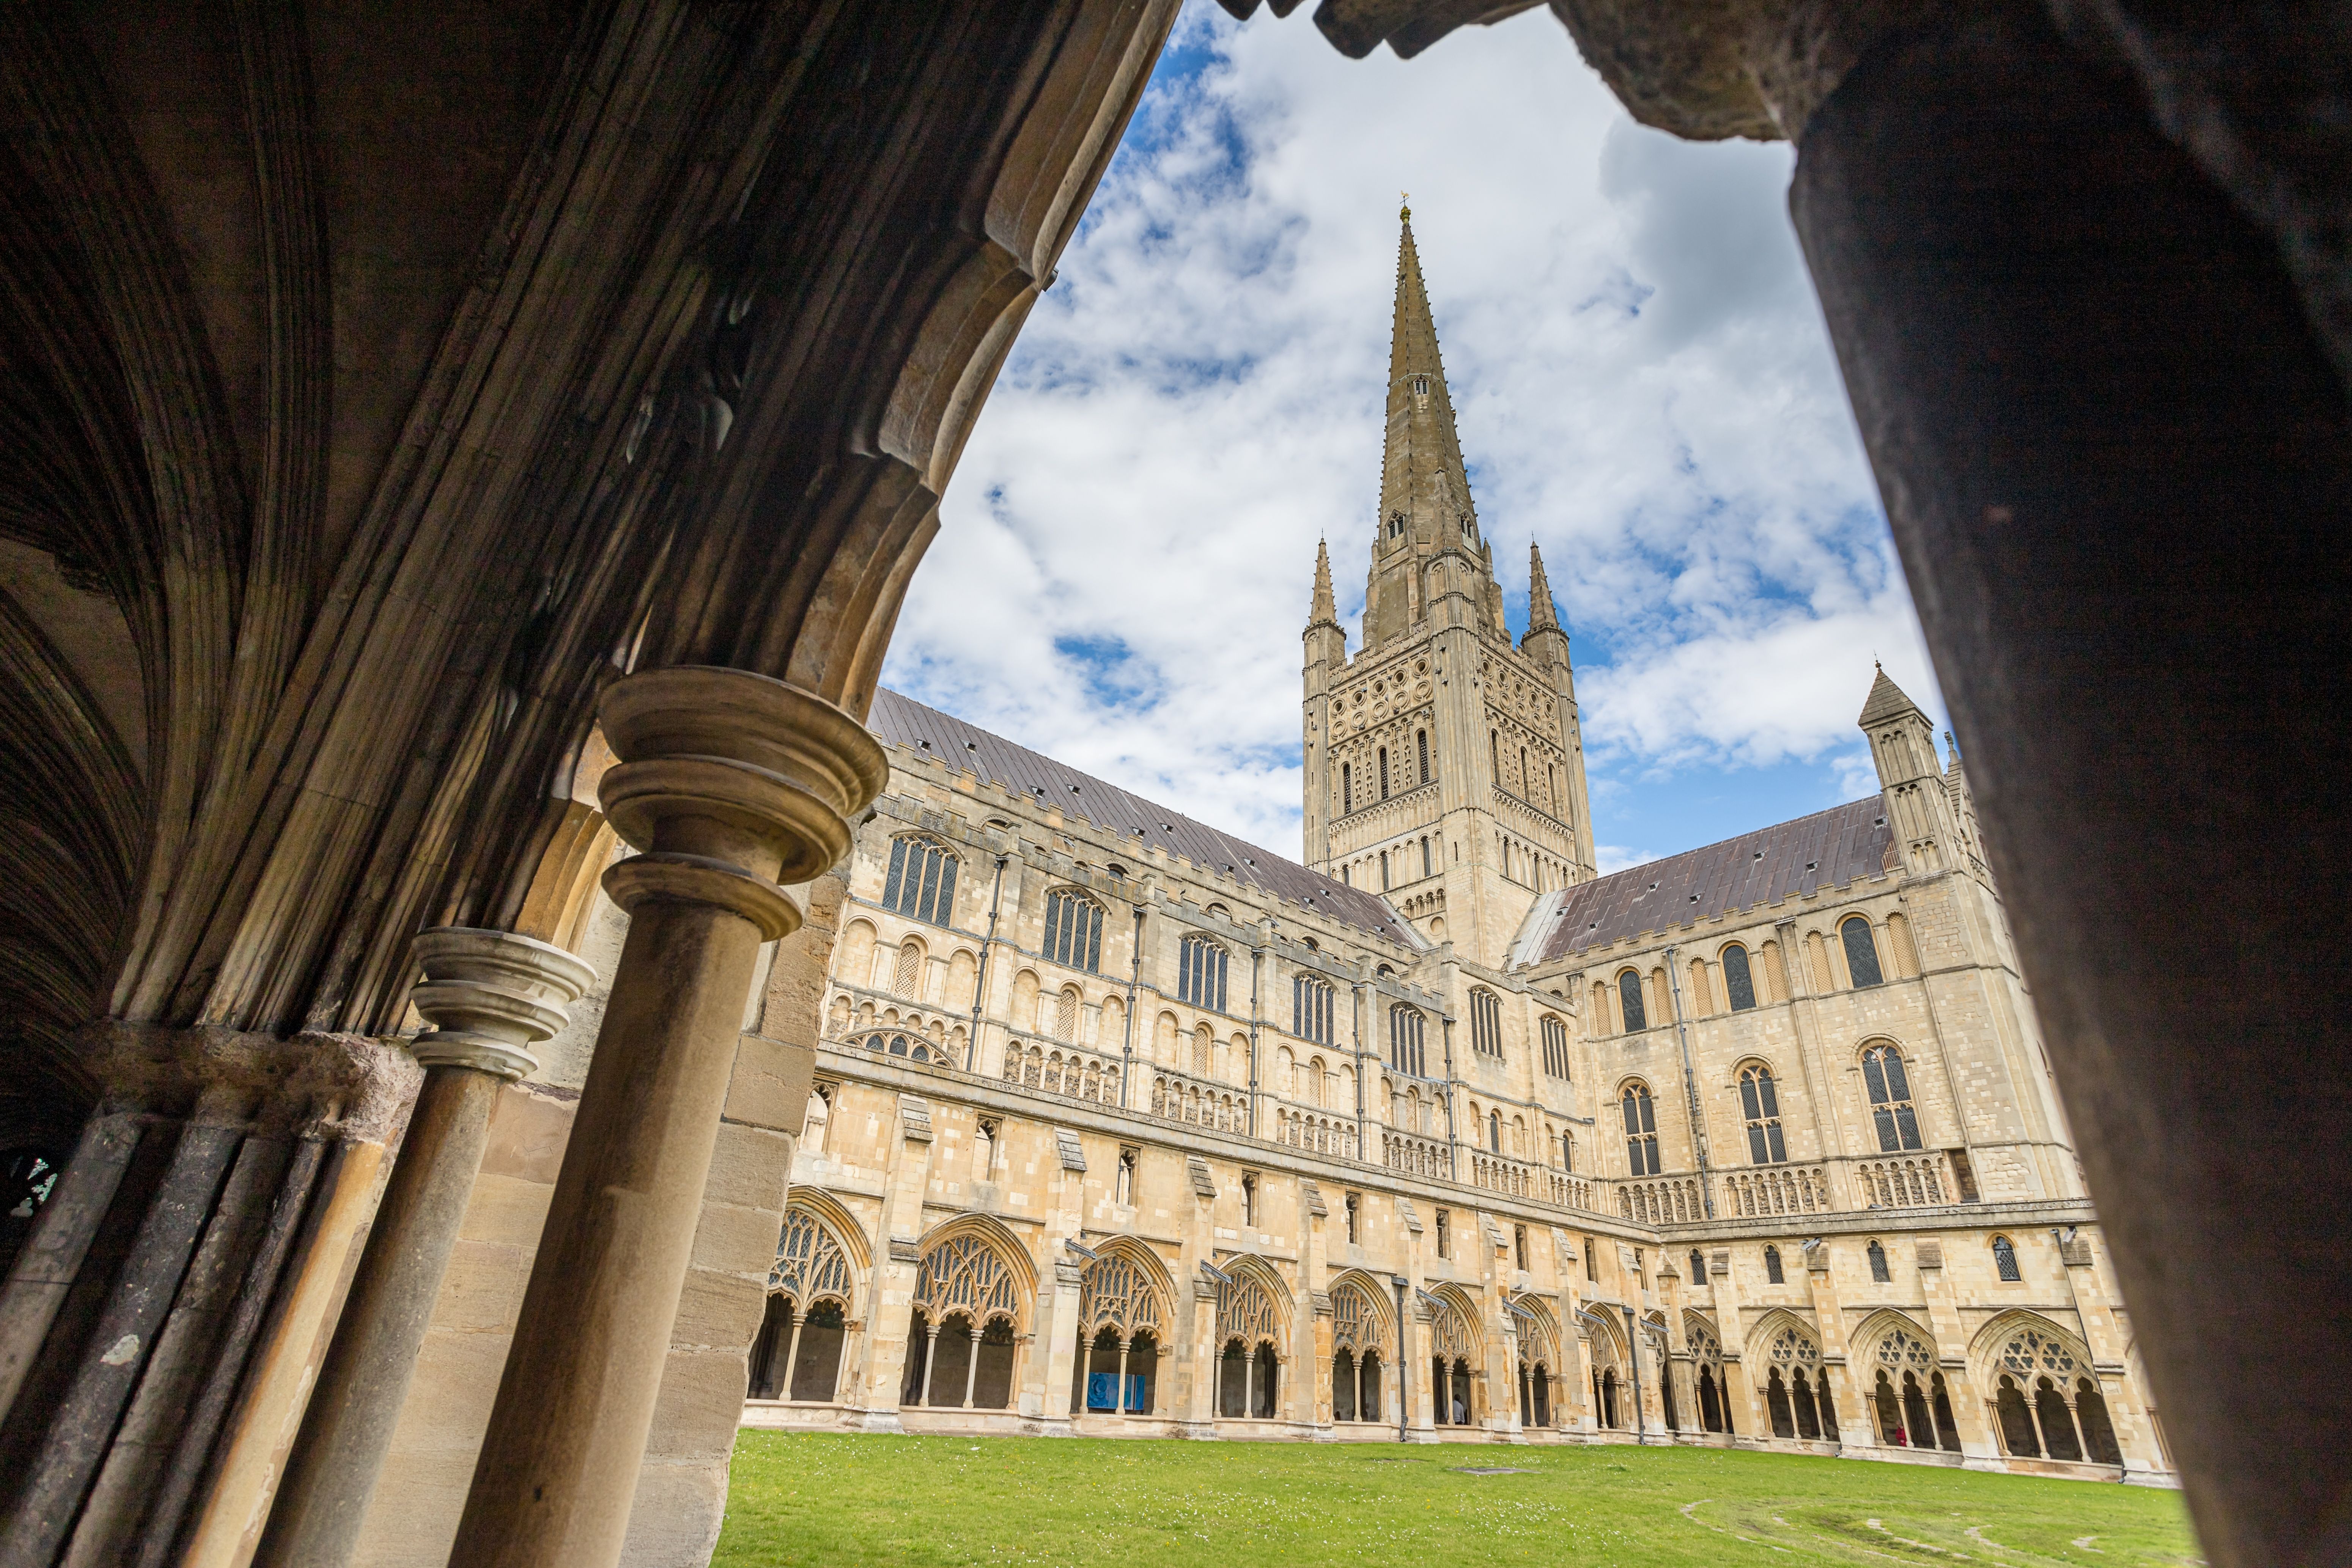 Norwich Cathedral in England